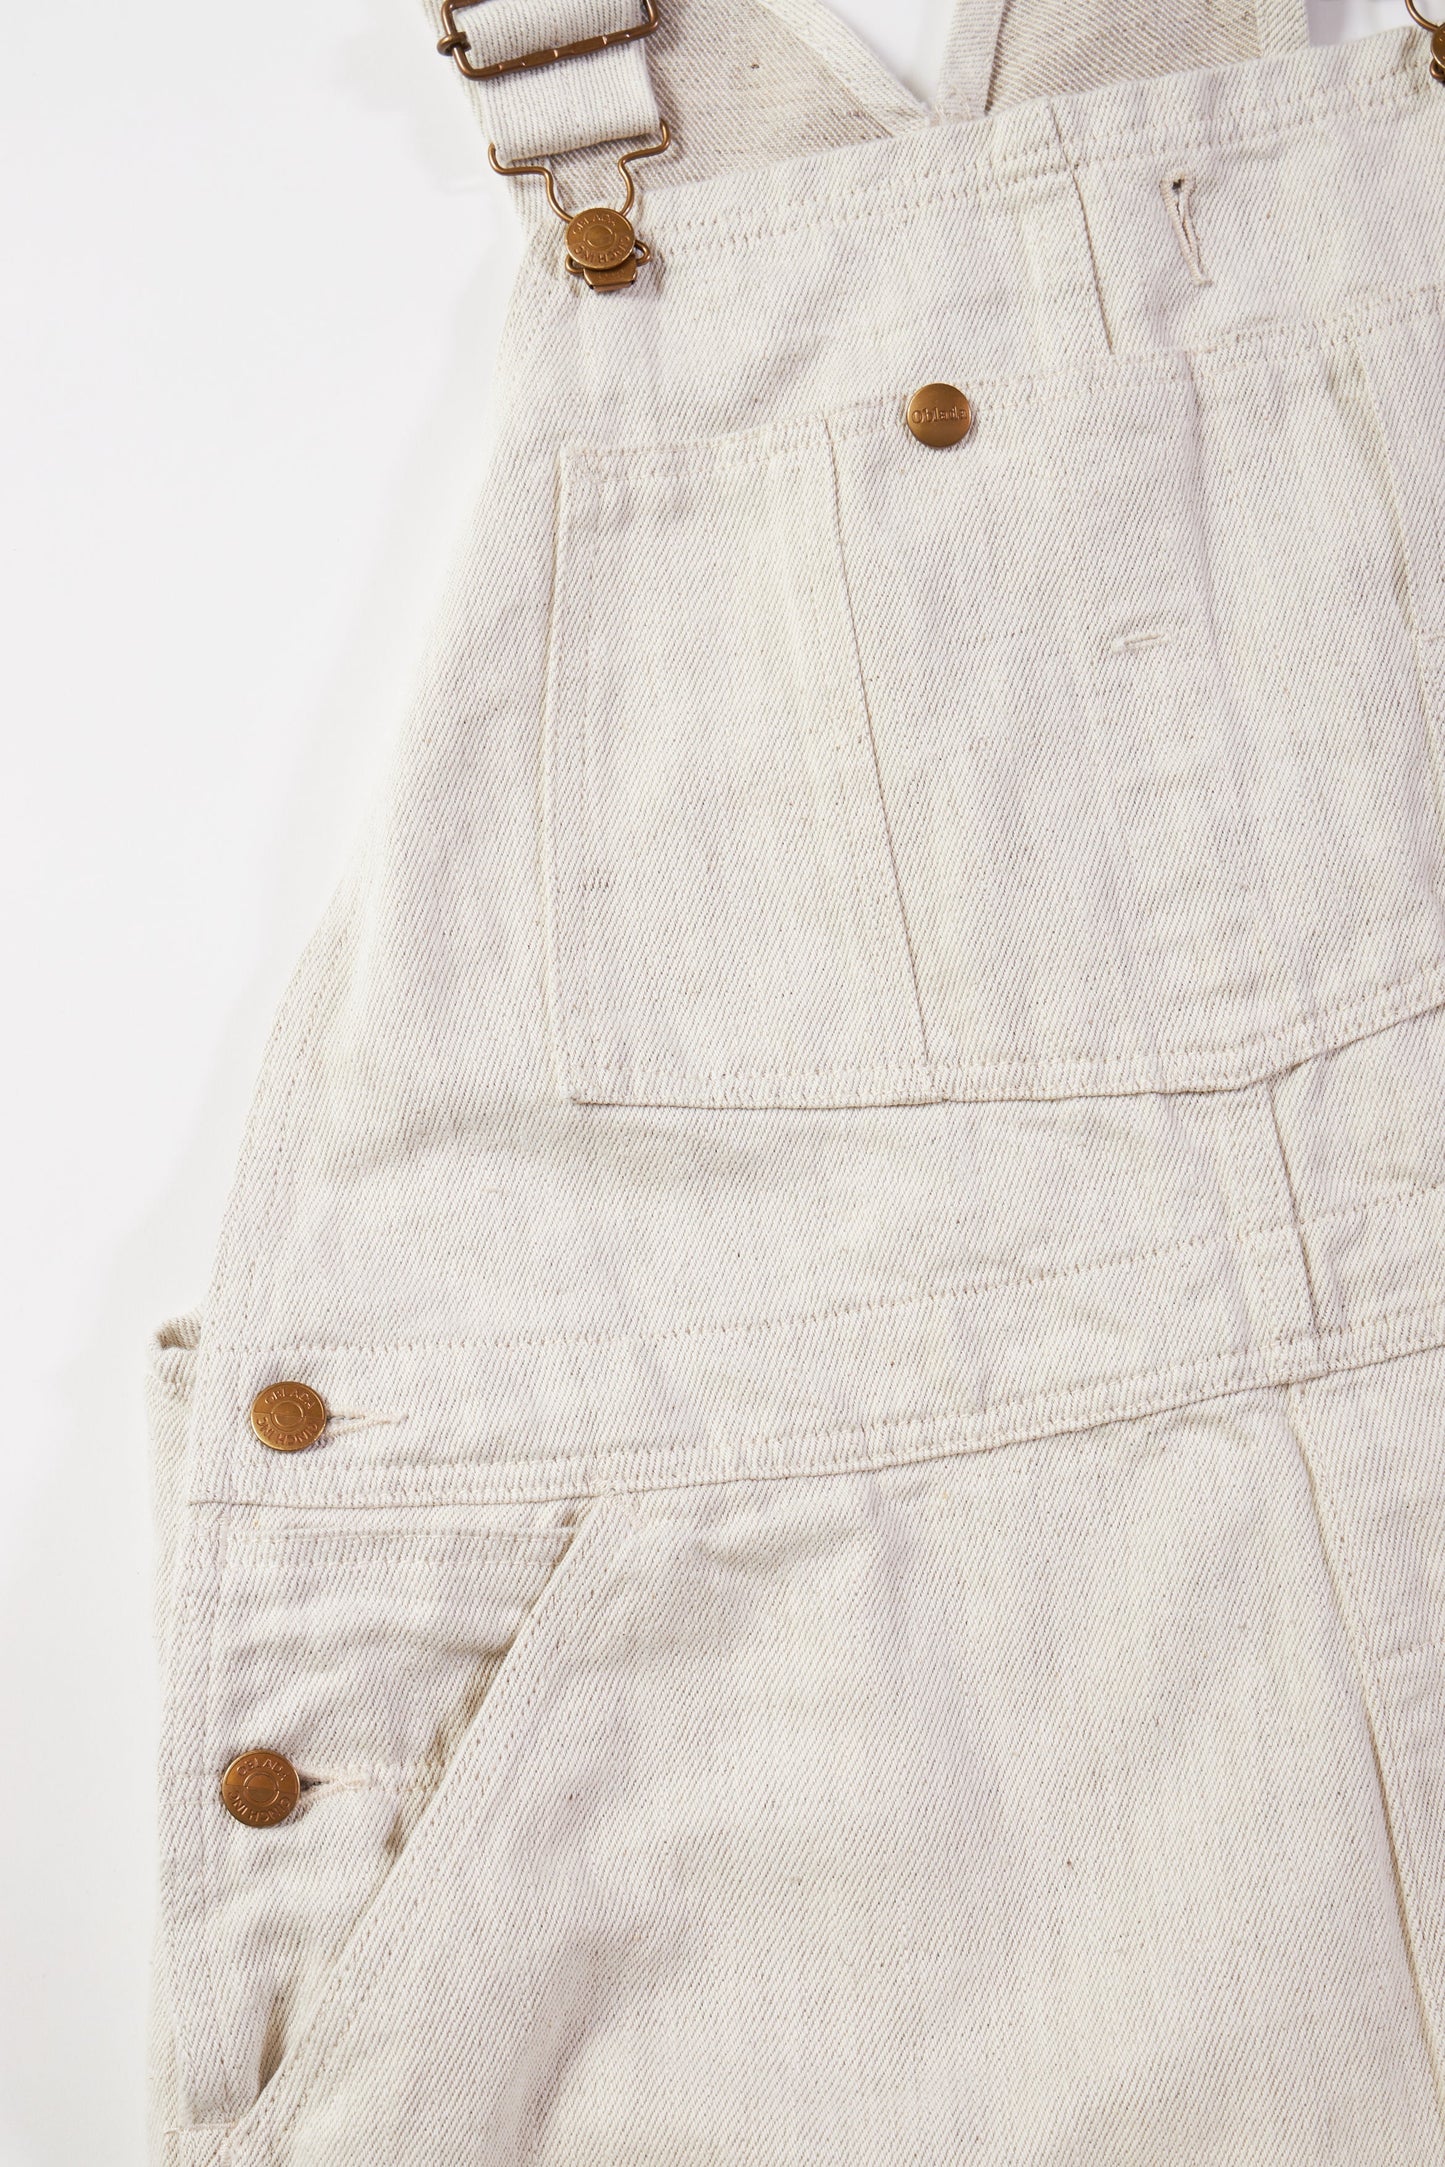 【Oblada】FRONTIER PANTS IVORY